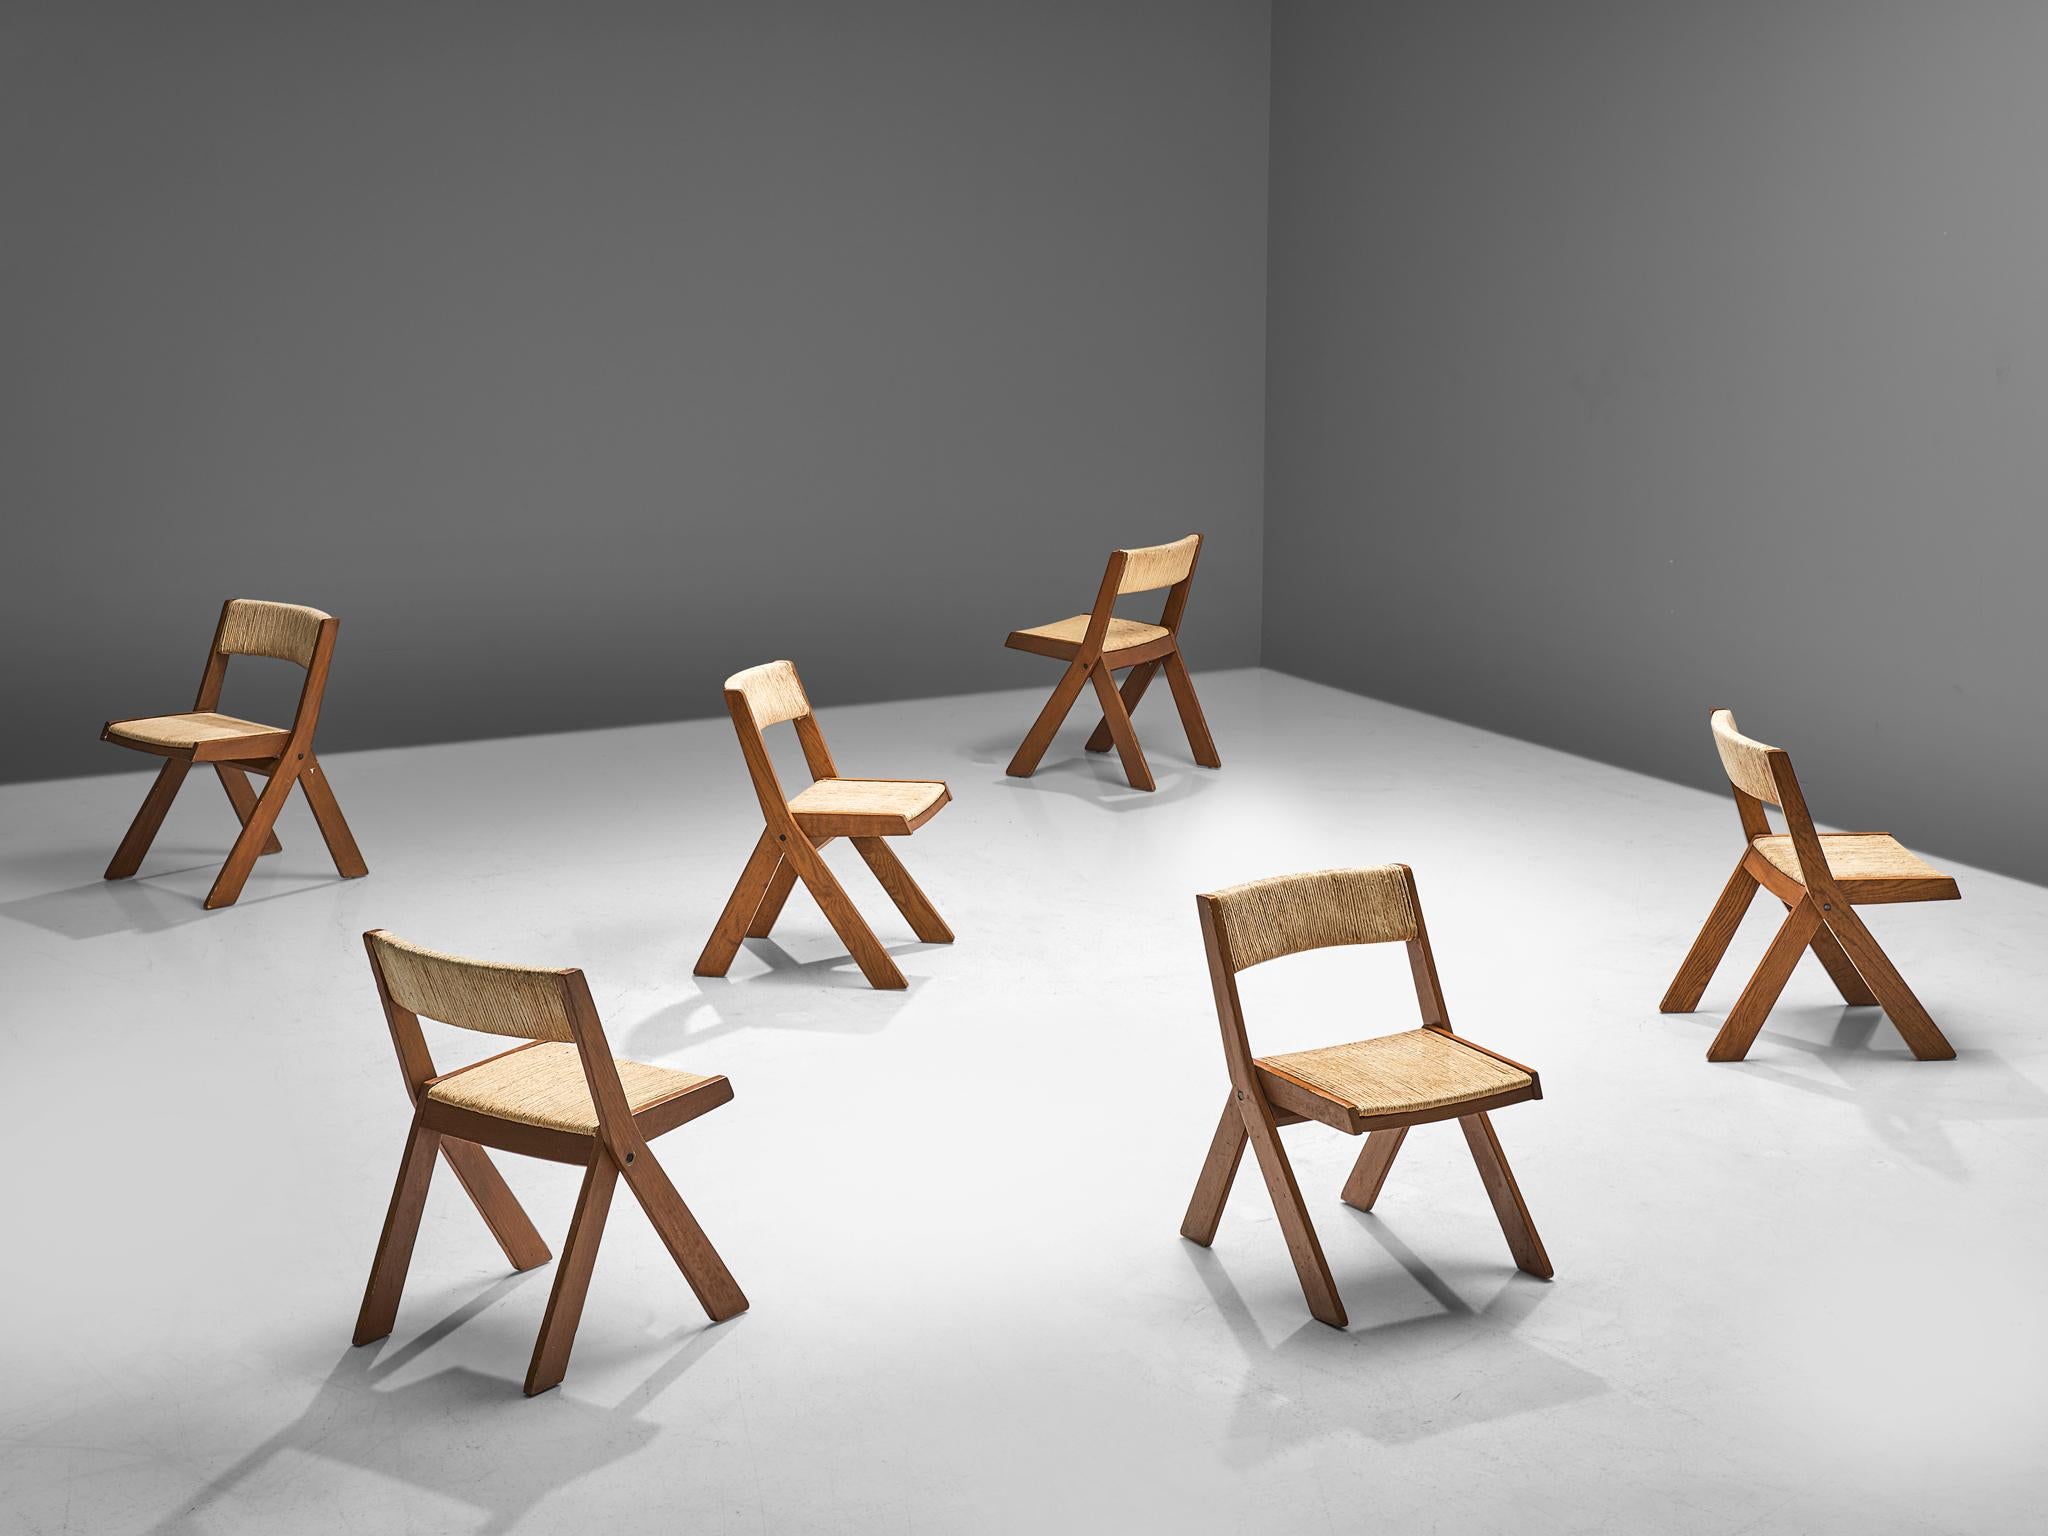 Set of 6 dining chairs, stained wood and rope, Italy, 1960s

Robust set of six dining chairs. The seats and backs are executed with rope. The stained wooden frame is sturdy, with thick flared legs. This burly and natural style is rough. This set